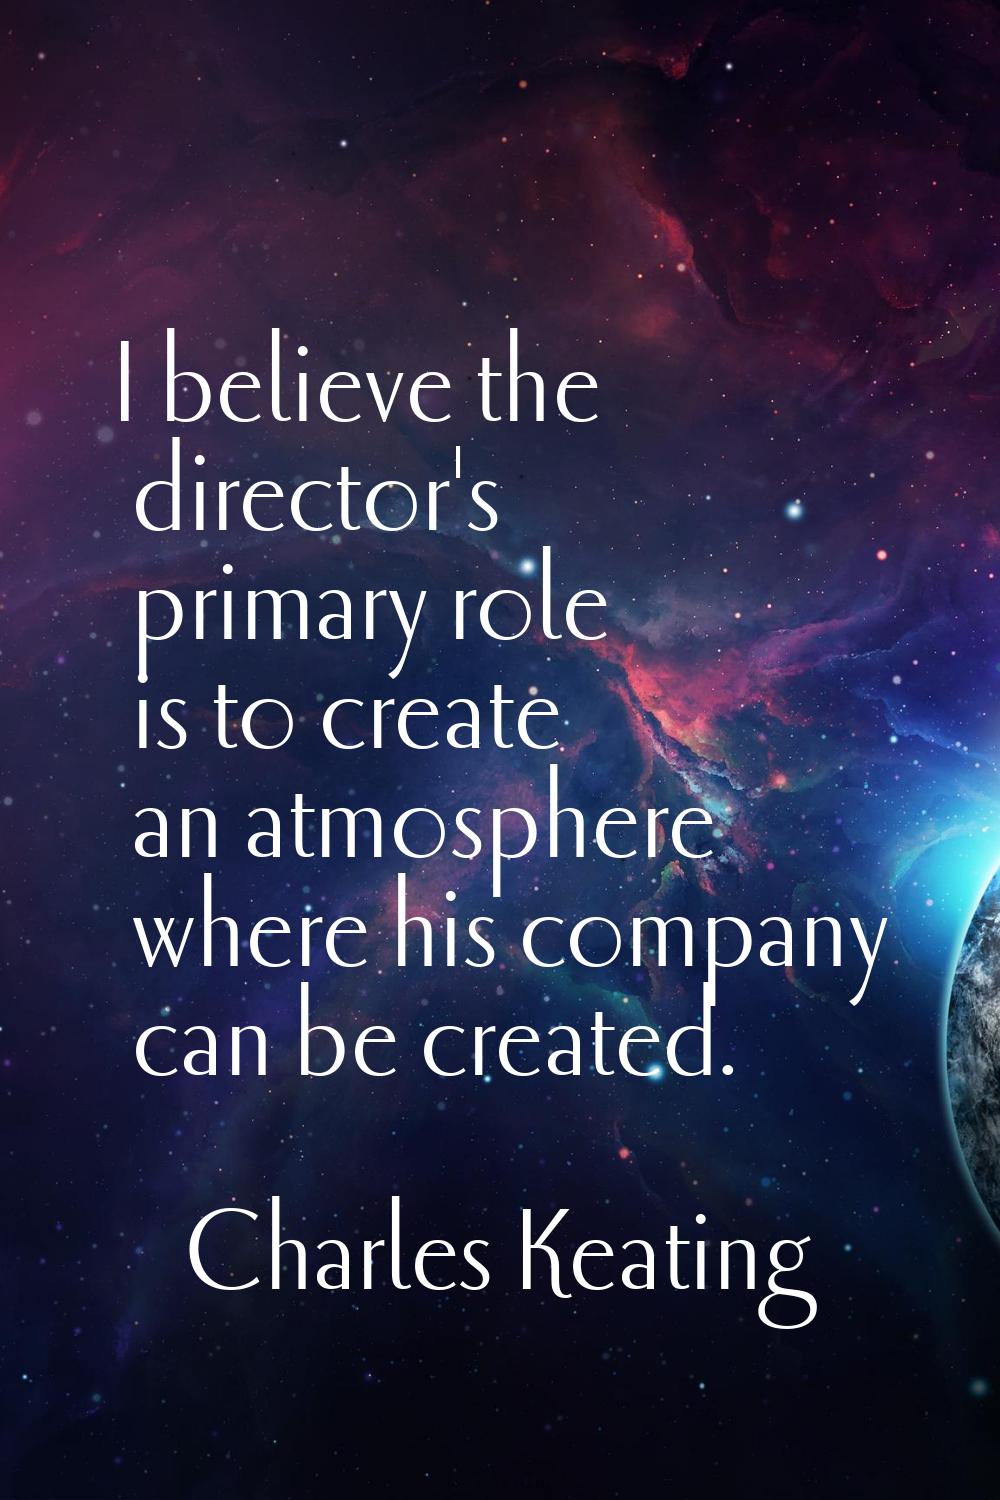 I believe the director's primary role is to create an atmosphere where his company can be created.